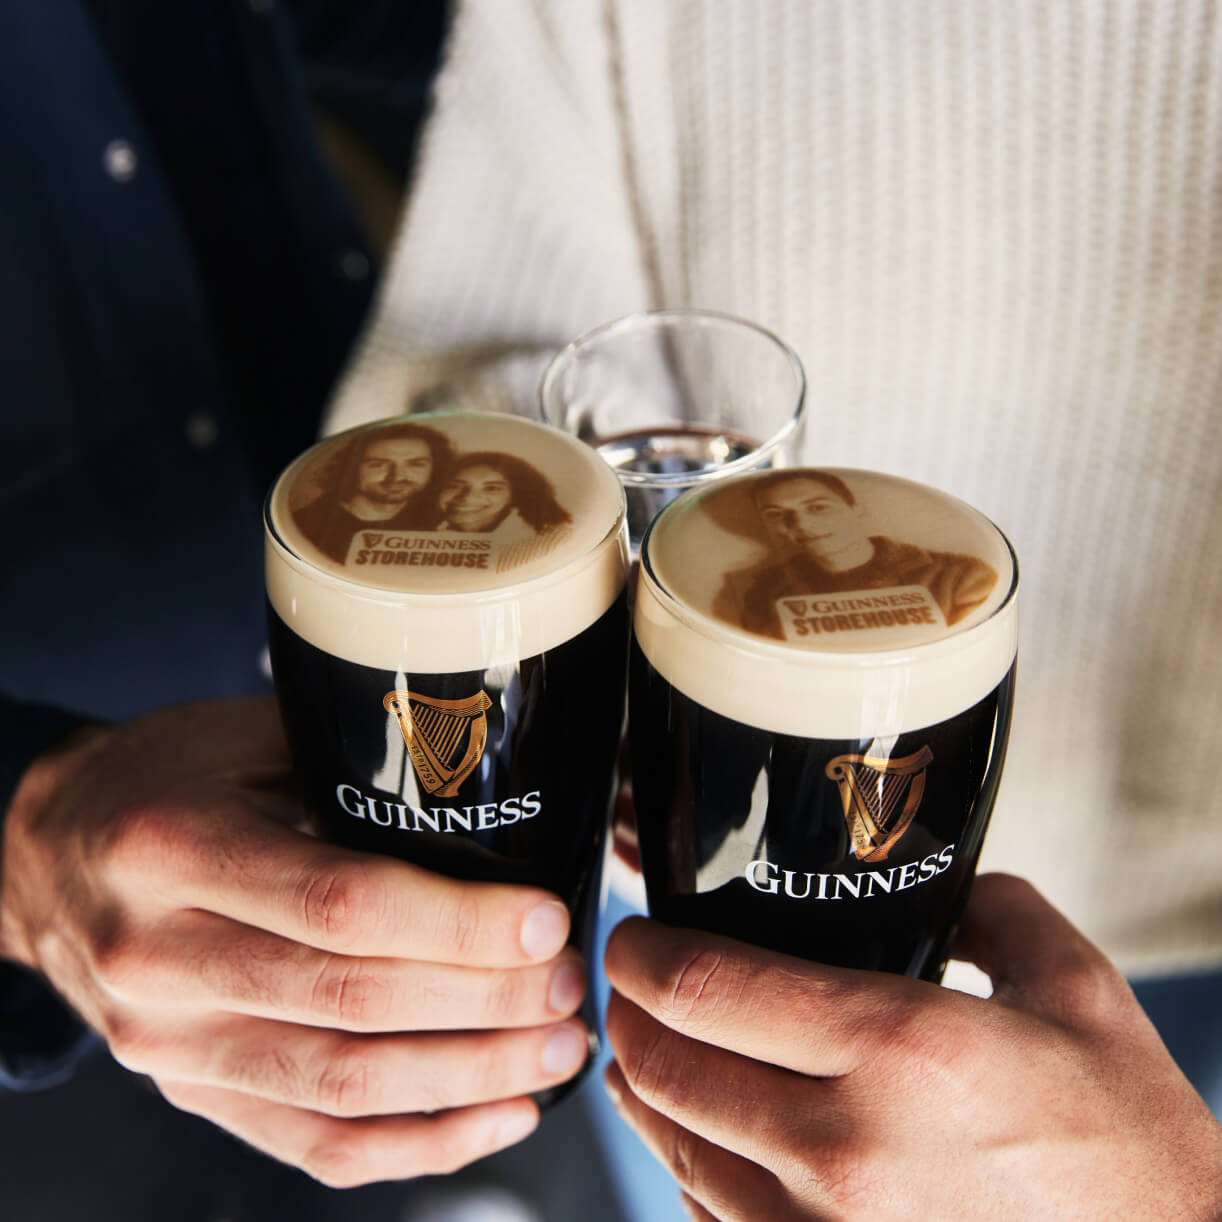 Two pints of Guinness with visitors faces printed on it